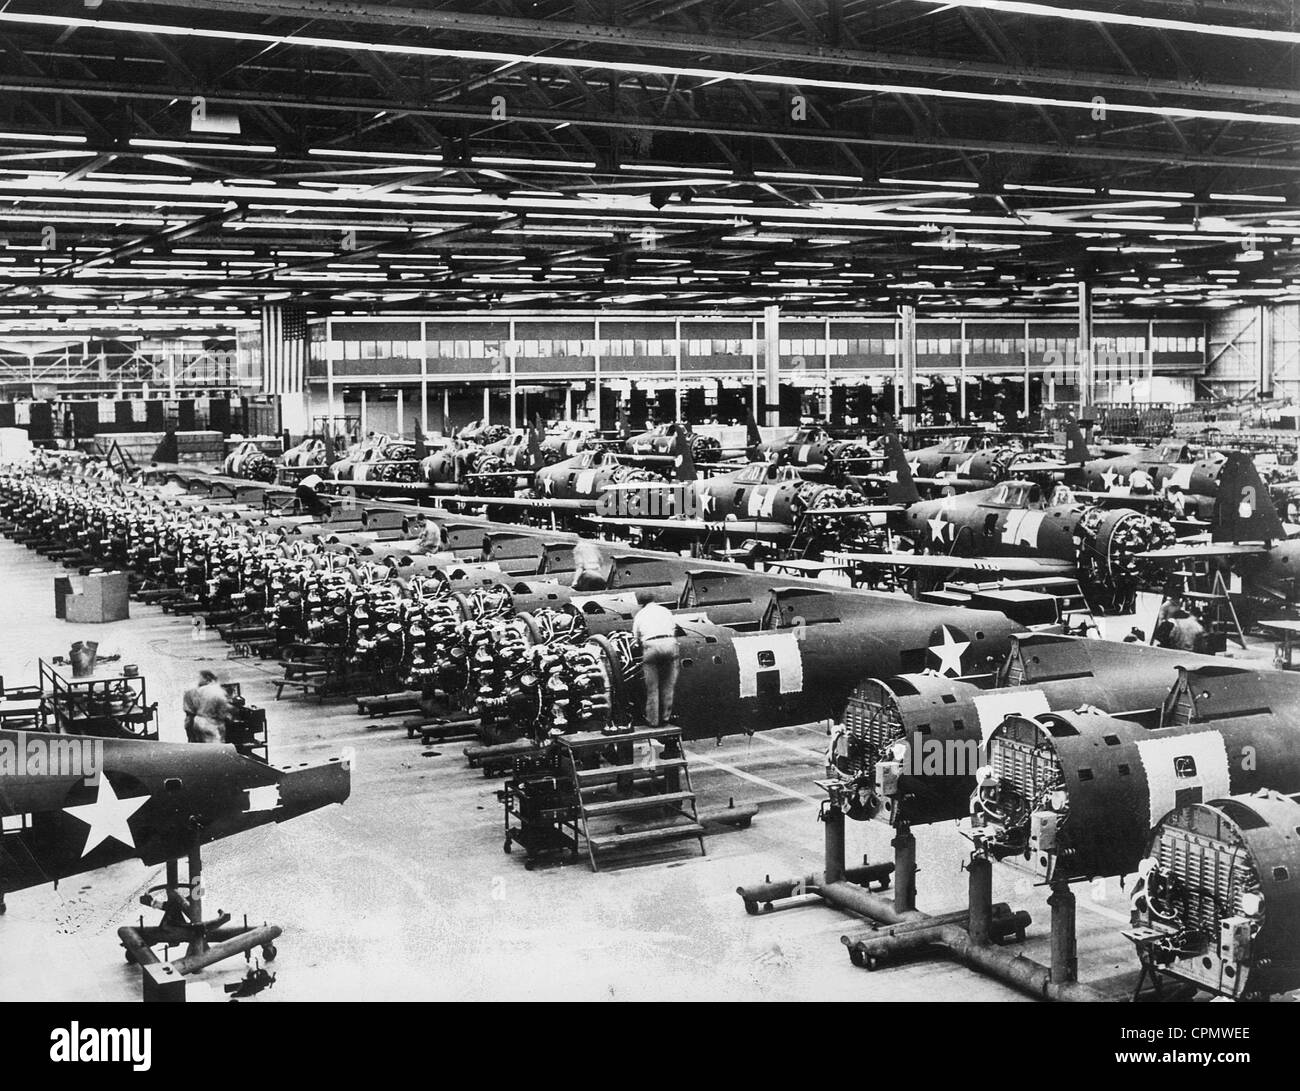 Wwii Factory High Resolution Stock Photography and Images - Alamy